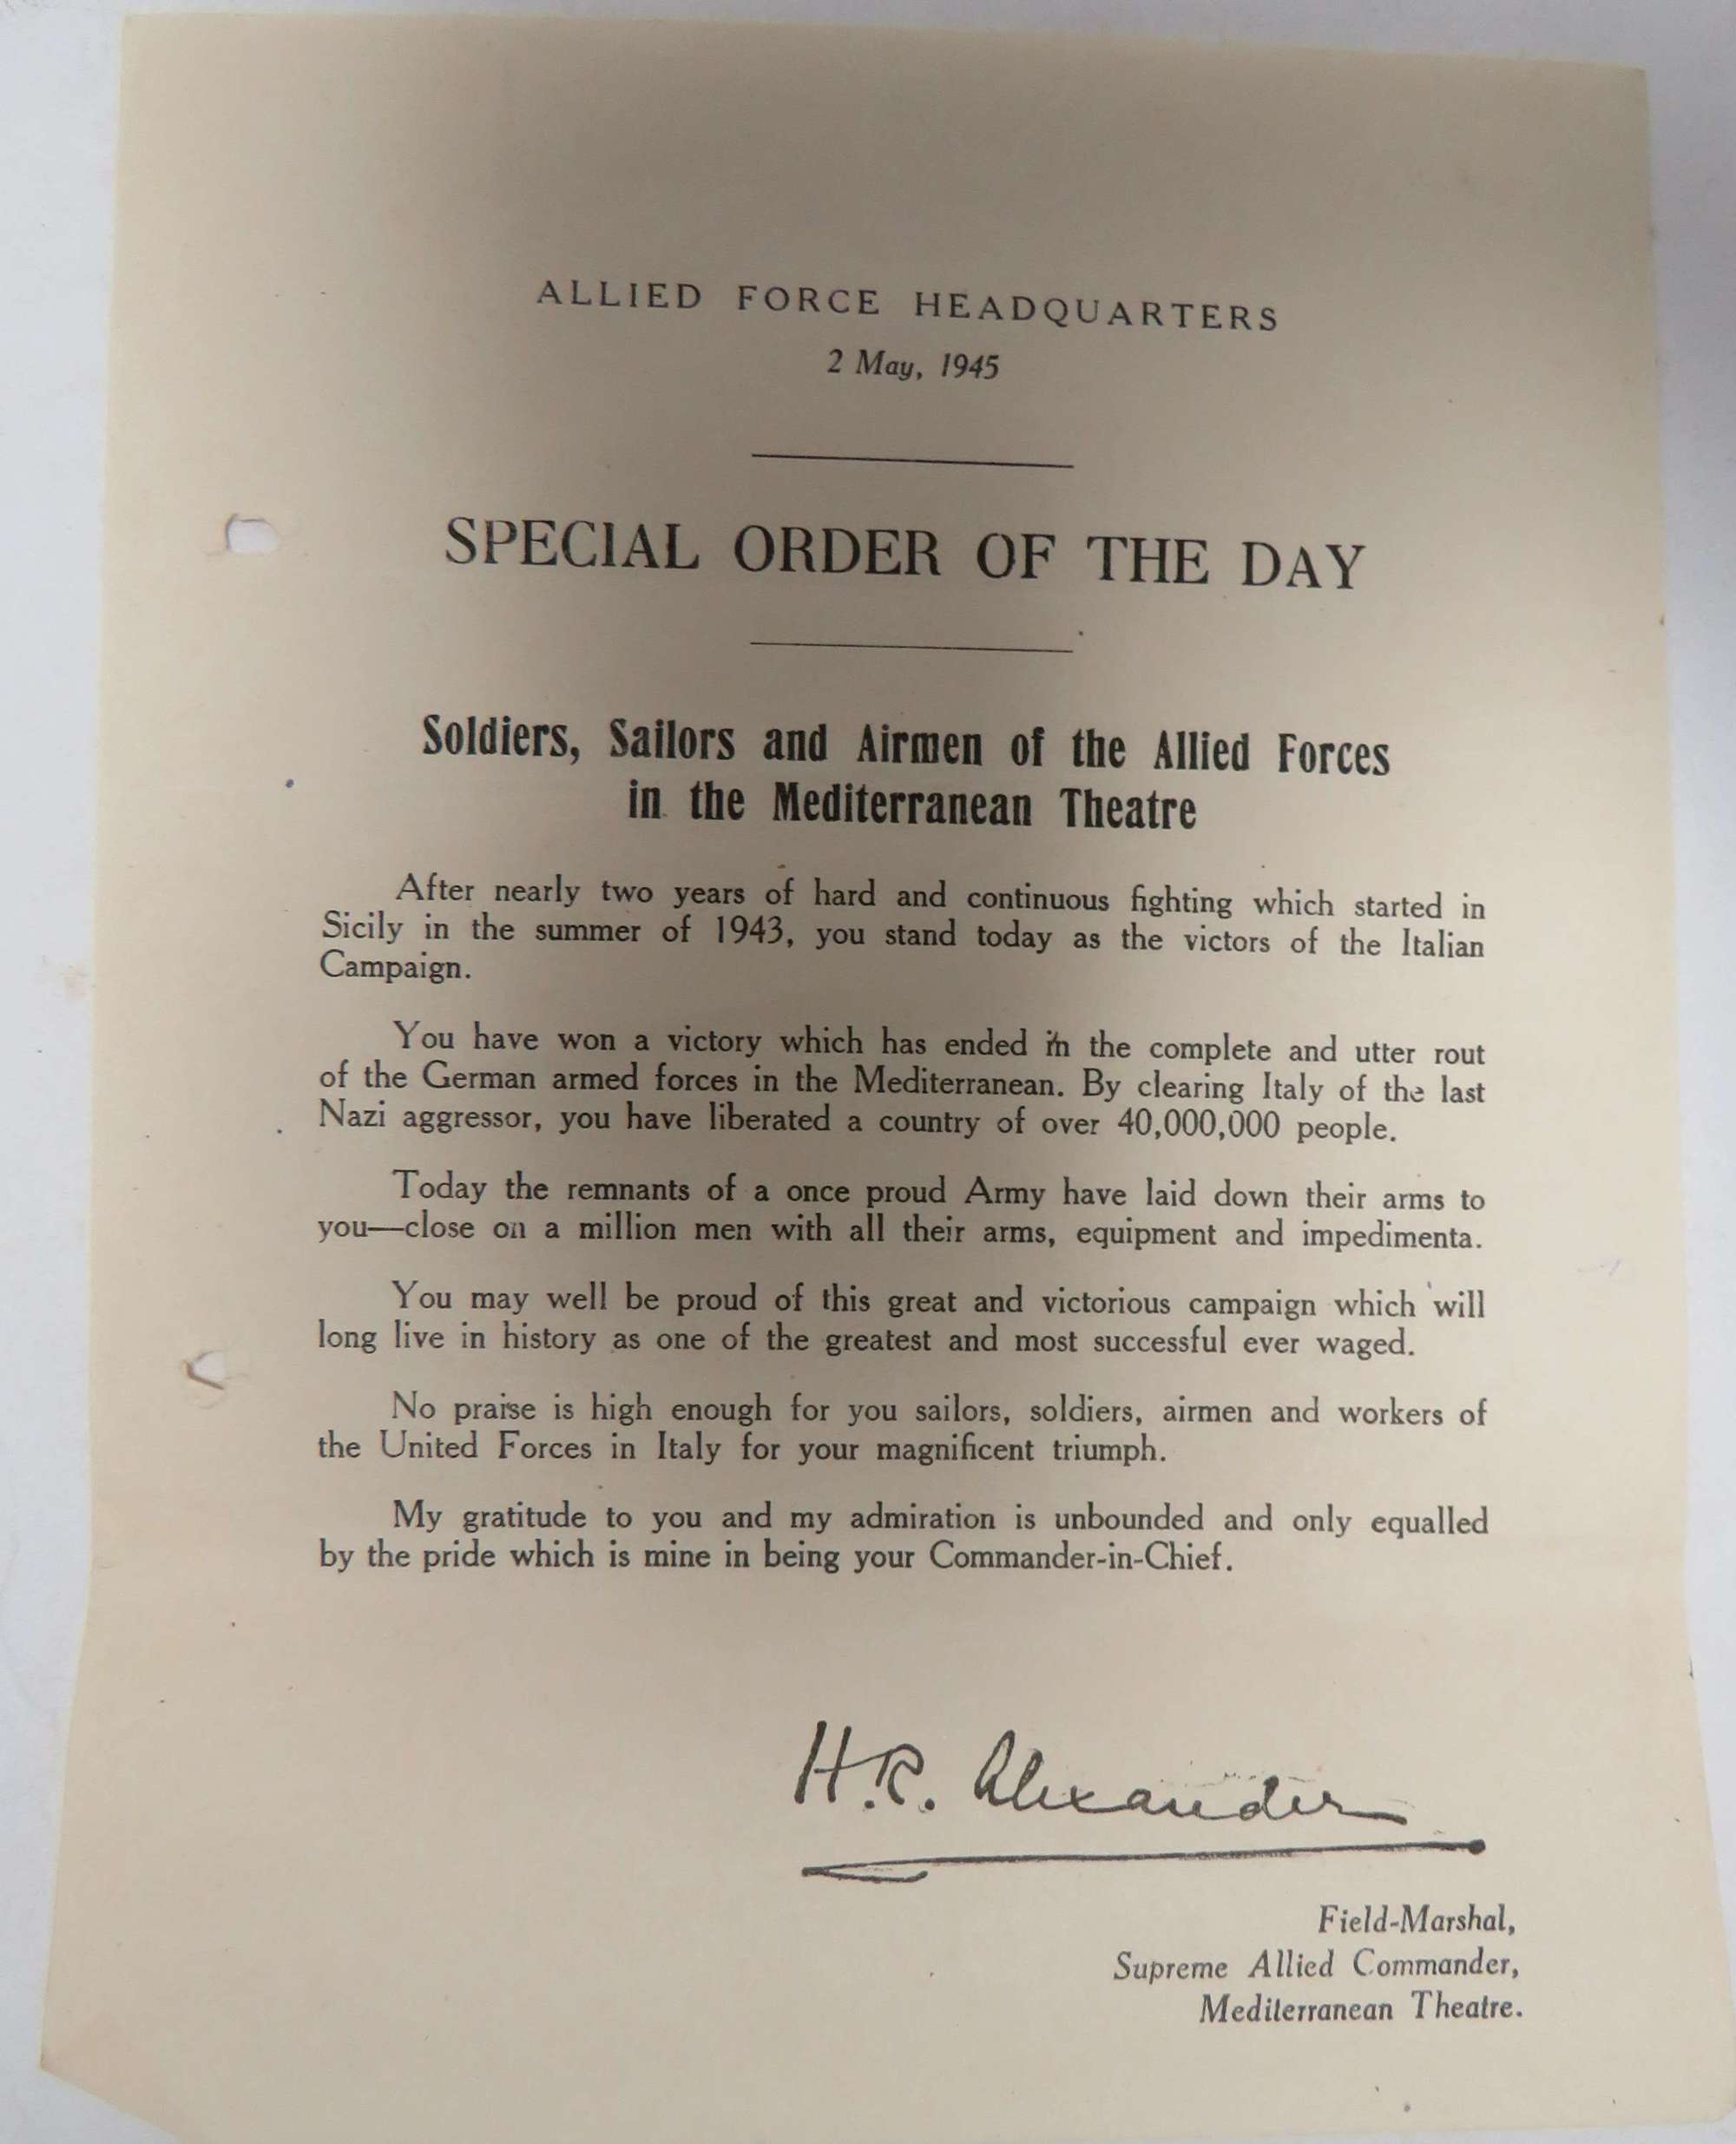 May 1945 Allied Forces H.Q Message from Alexander